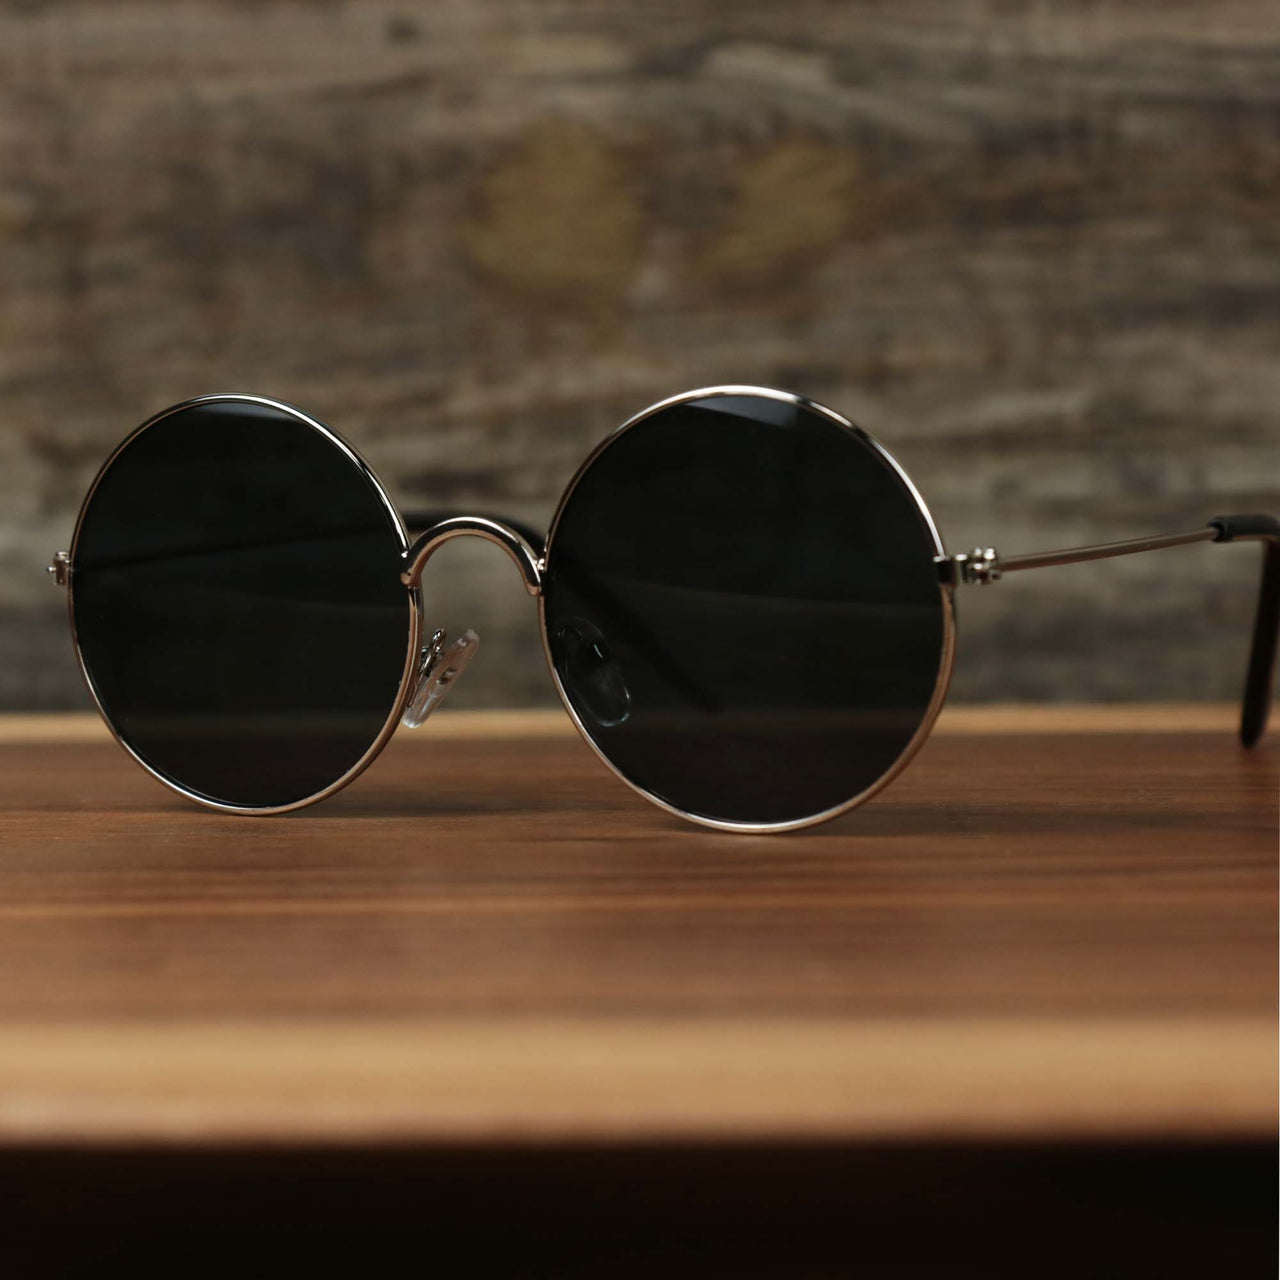 The Youth Round Frame Black Lens Sunglasses with Silver Frame